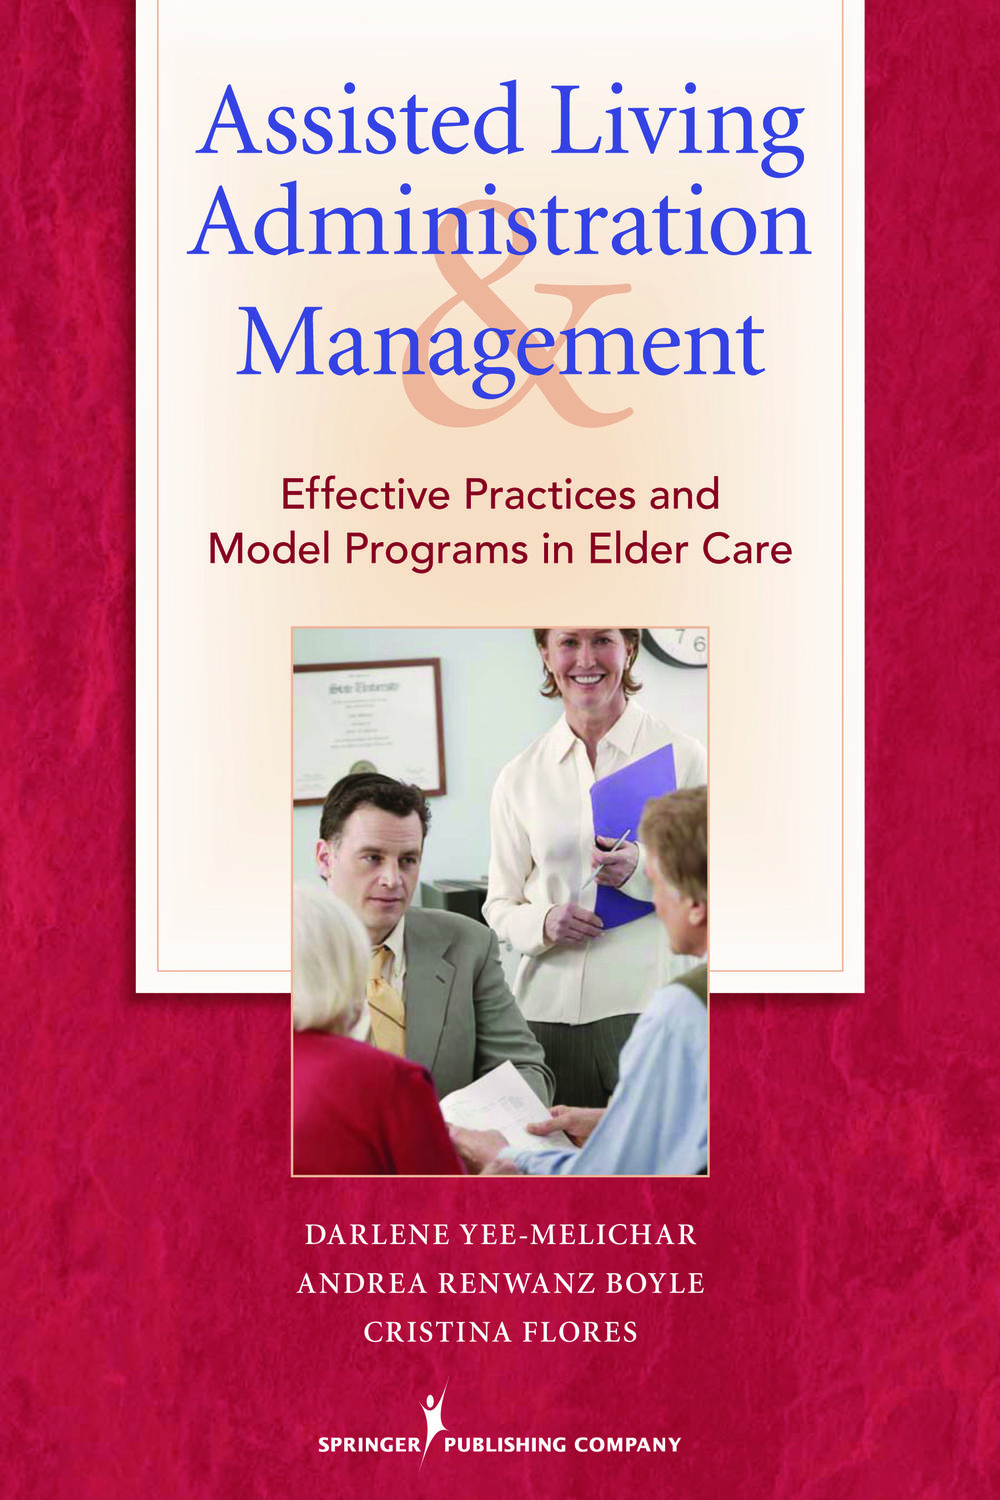 Assisted Living Administration and Management - Darlene Yee-Melichar, EdD, Andrea Renwanz Boyle, DNSC, Cristina Flores, PhD, RN